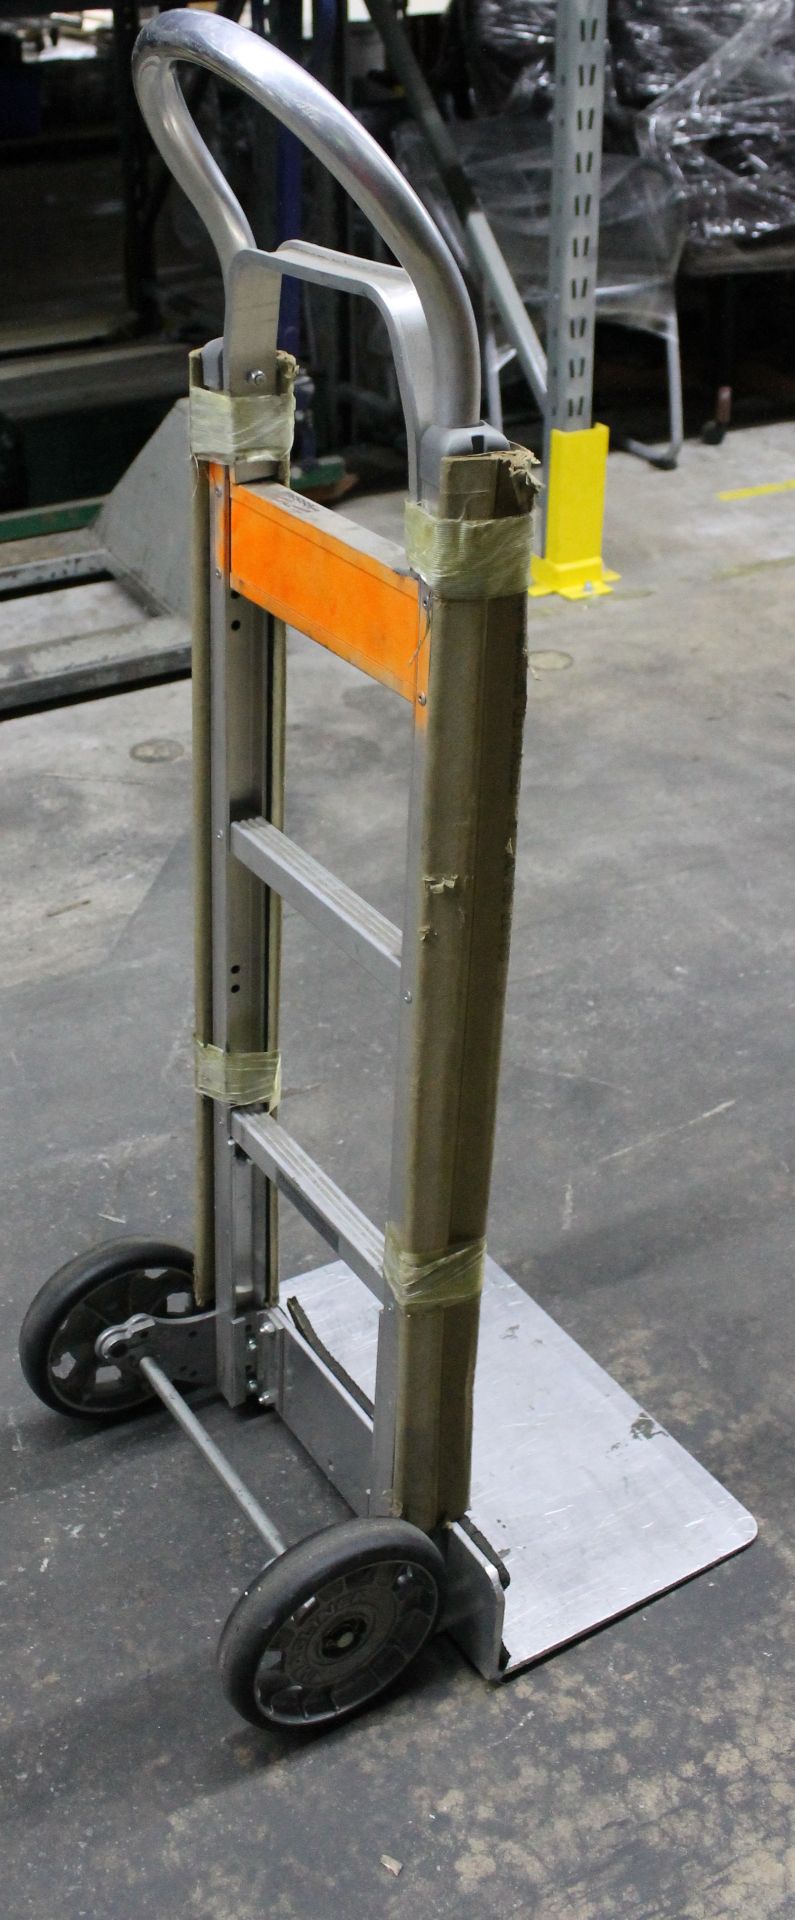 USED LIBERATOR HAND TRUCK - Image 3 of 4